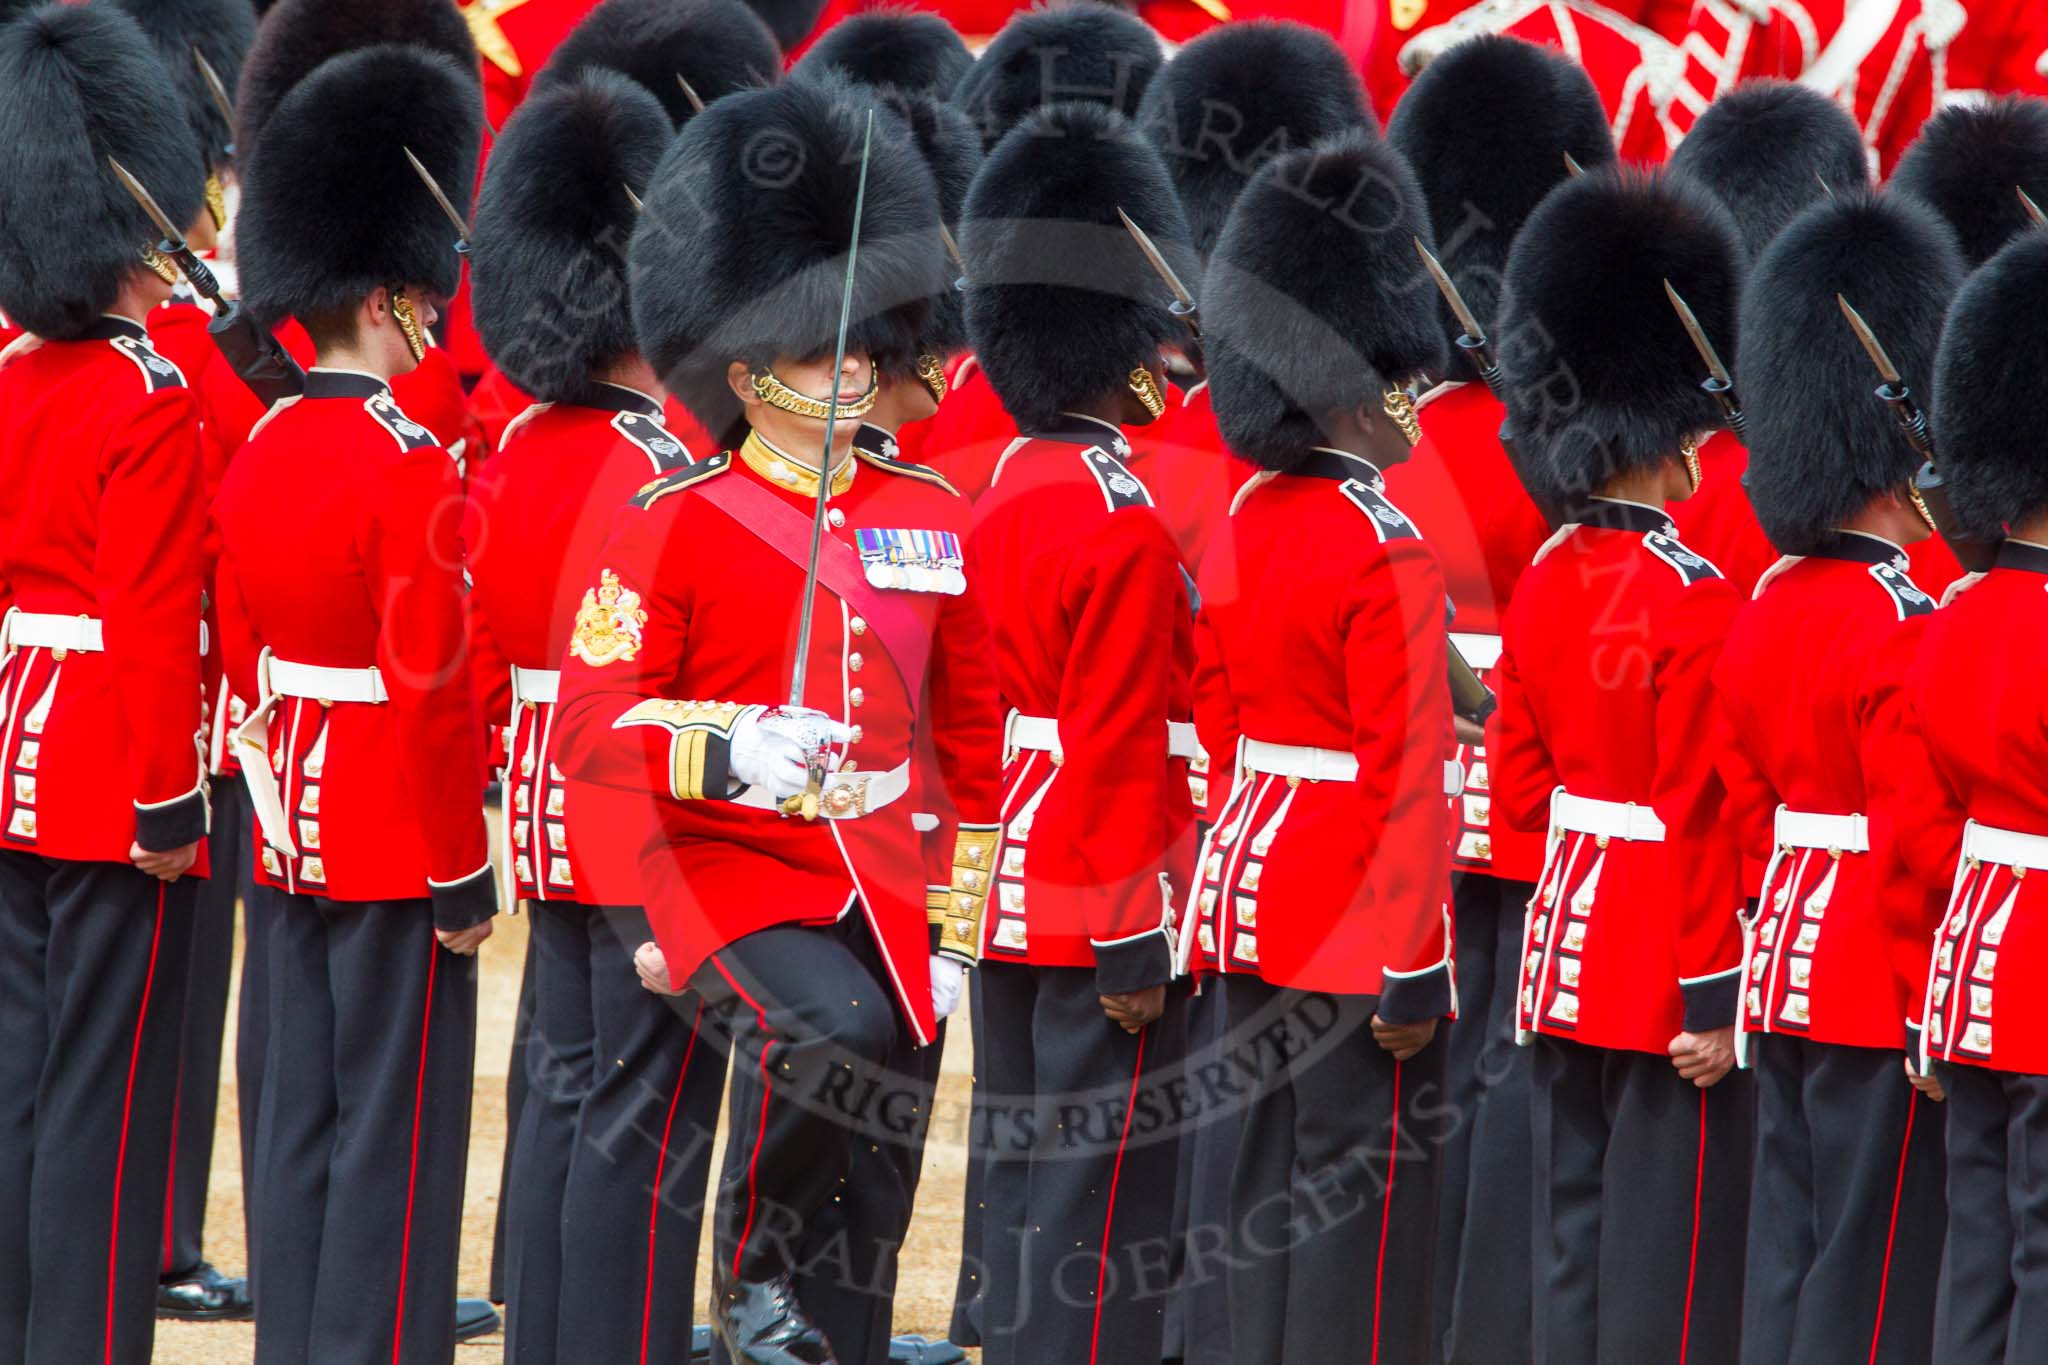 Trooping the Colour 2014.
Horse Guards Parade, Westminster,
London SW1A,

United Kingdom,
on 14 June 2014 at 11:23, image #549